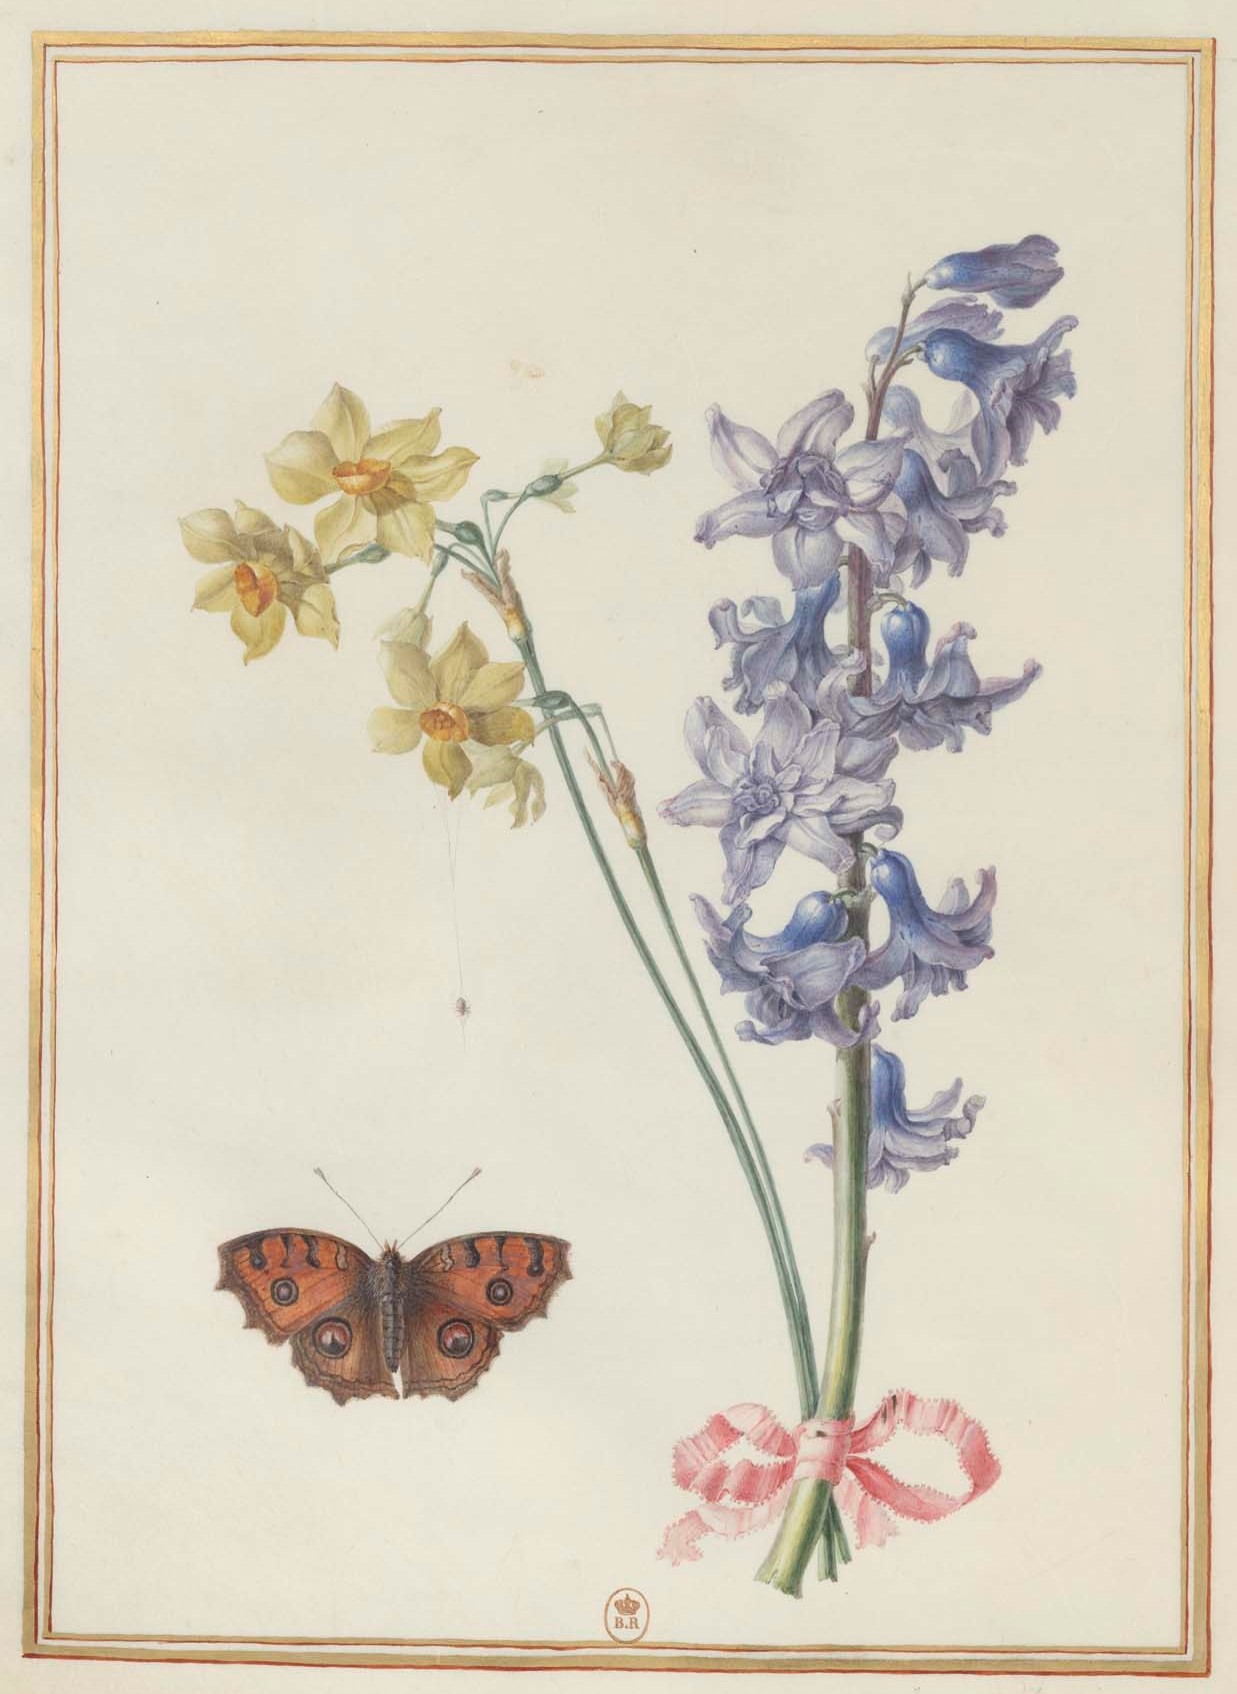 Madeleine Françoise Basseporte's drawing of hyacnths, narcissus and a moth in her 18th century album of flowers. Drawing in the collection of the Bibliothèque nationale de France, press photo courtesy of the Clark Art Institute